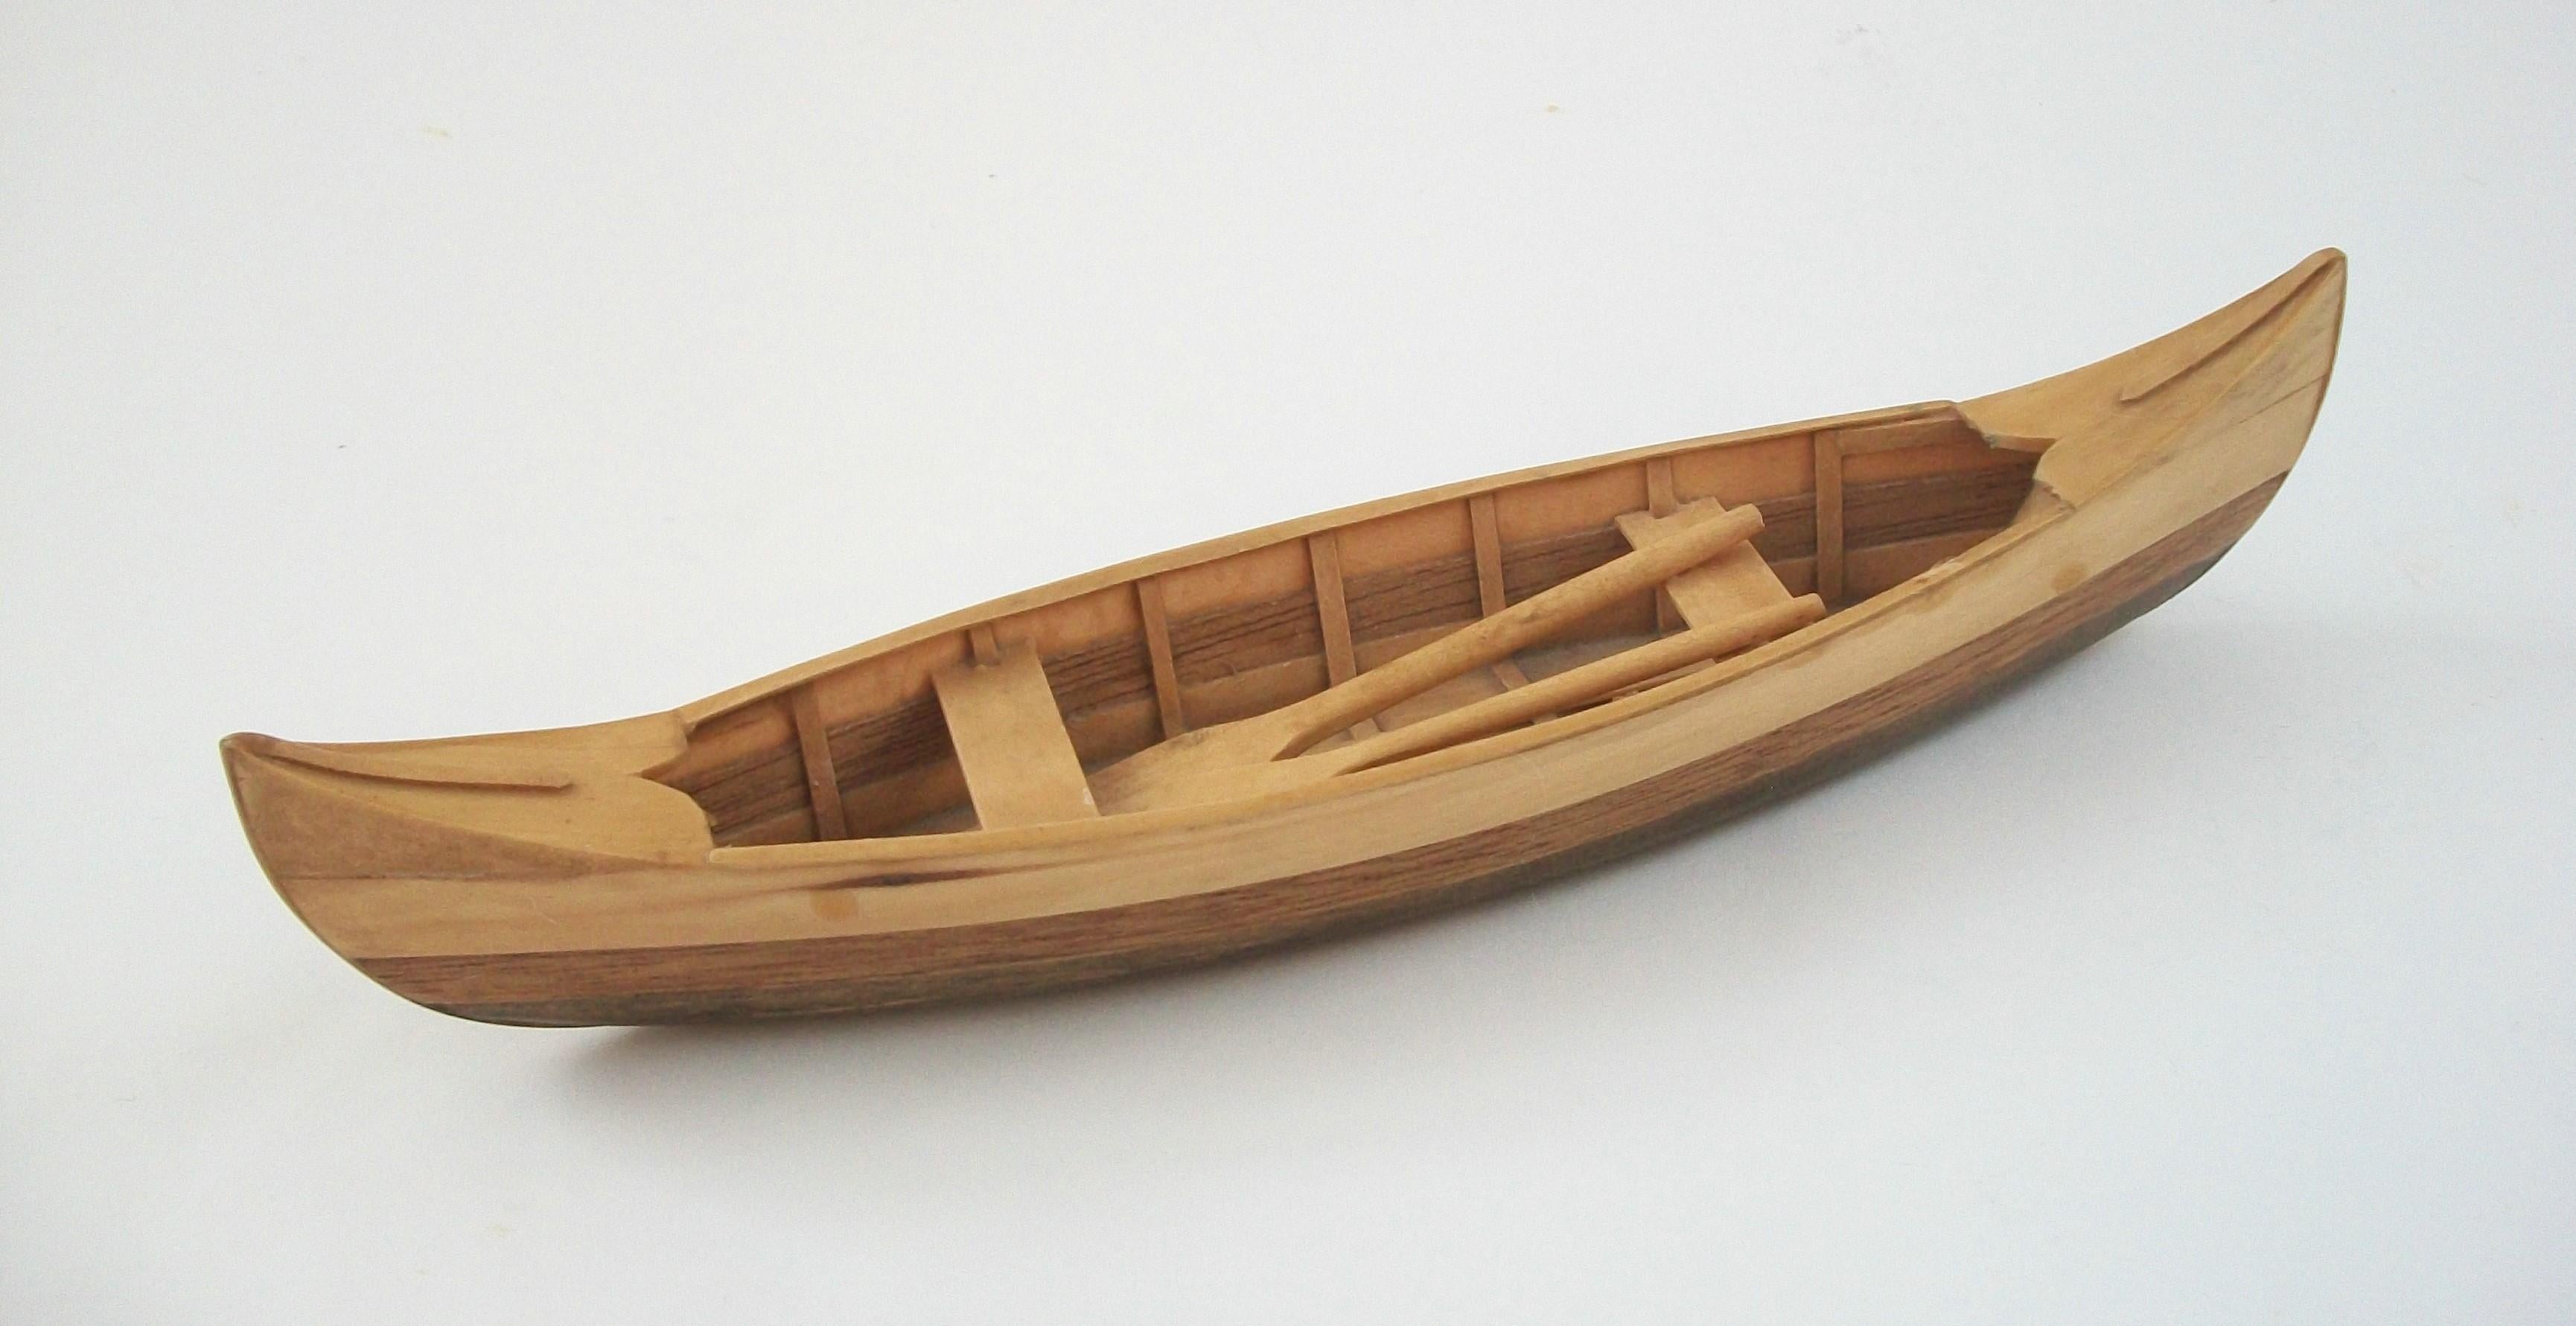 Vintage pine and cedar canoe scale model - featuring a detailed interior with two seats and fixed oars - the exterior base stained medium walnut, the cedar and pine left natural - unsigned - Canada (likely) - mid 20th century.

Excellent vintage